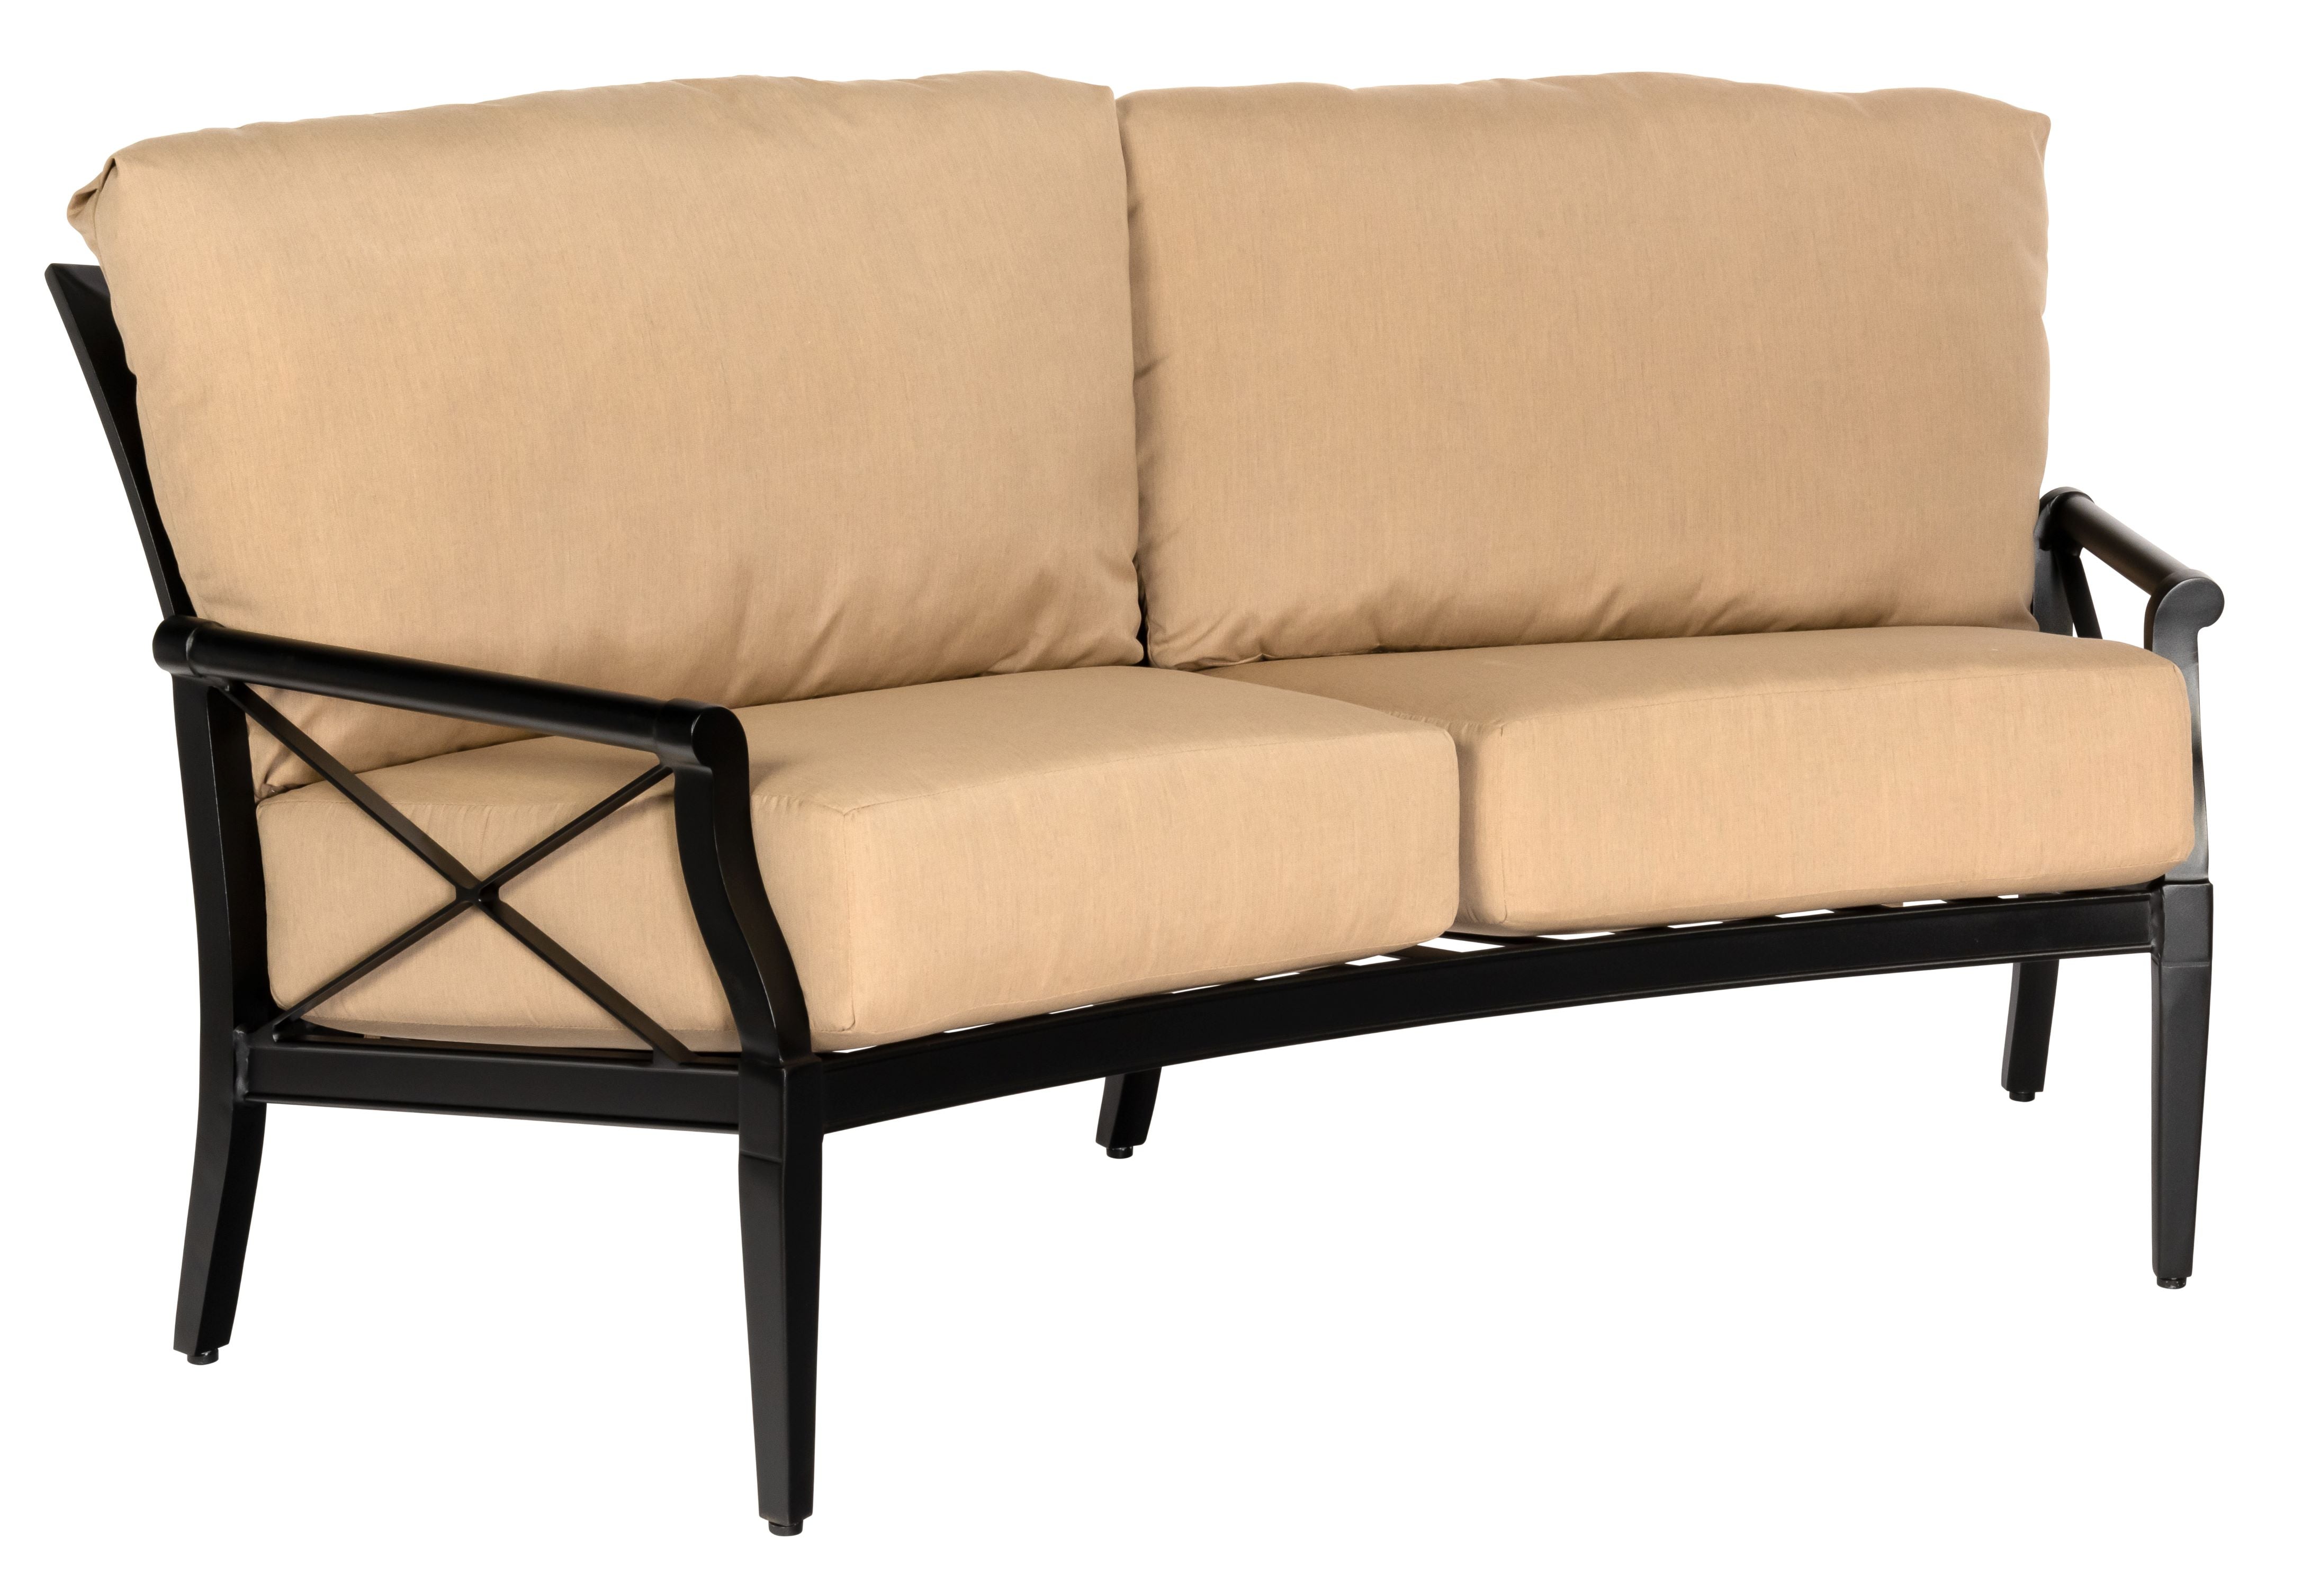 Andover Crescent Love Seat by Woodard